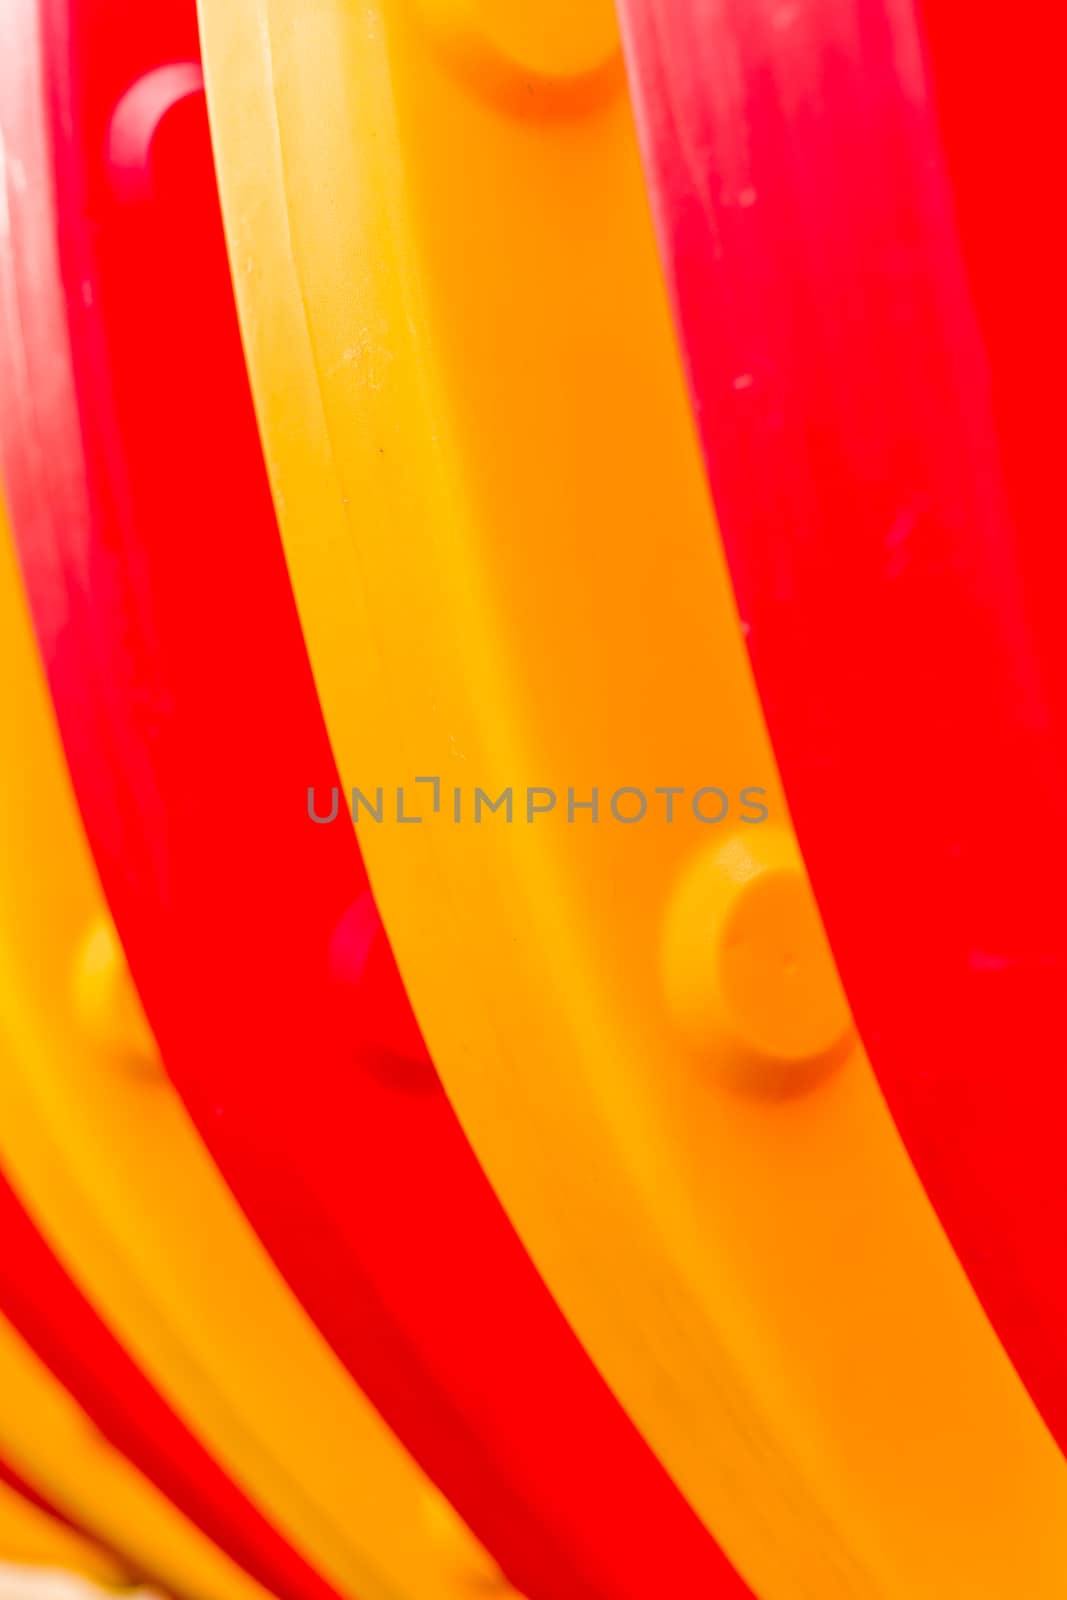 Abstract image of yellow and red spiral to use for background.